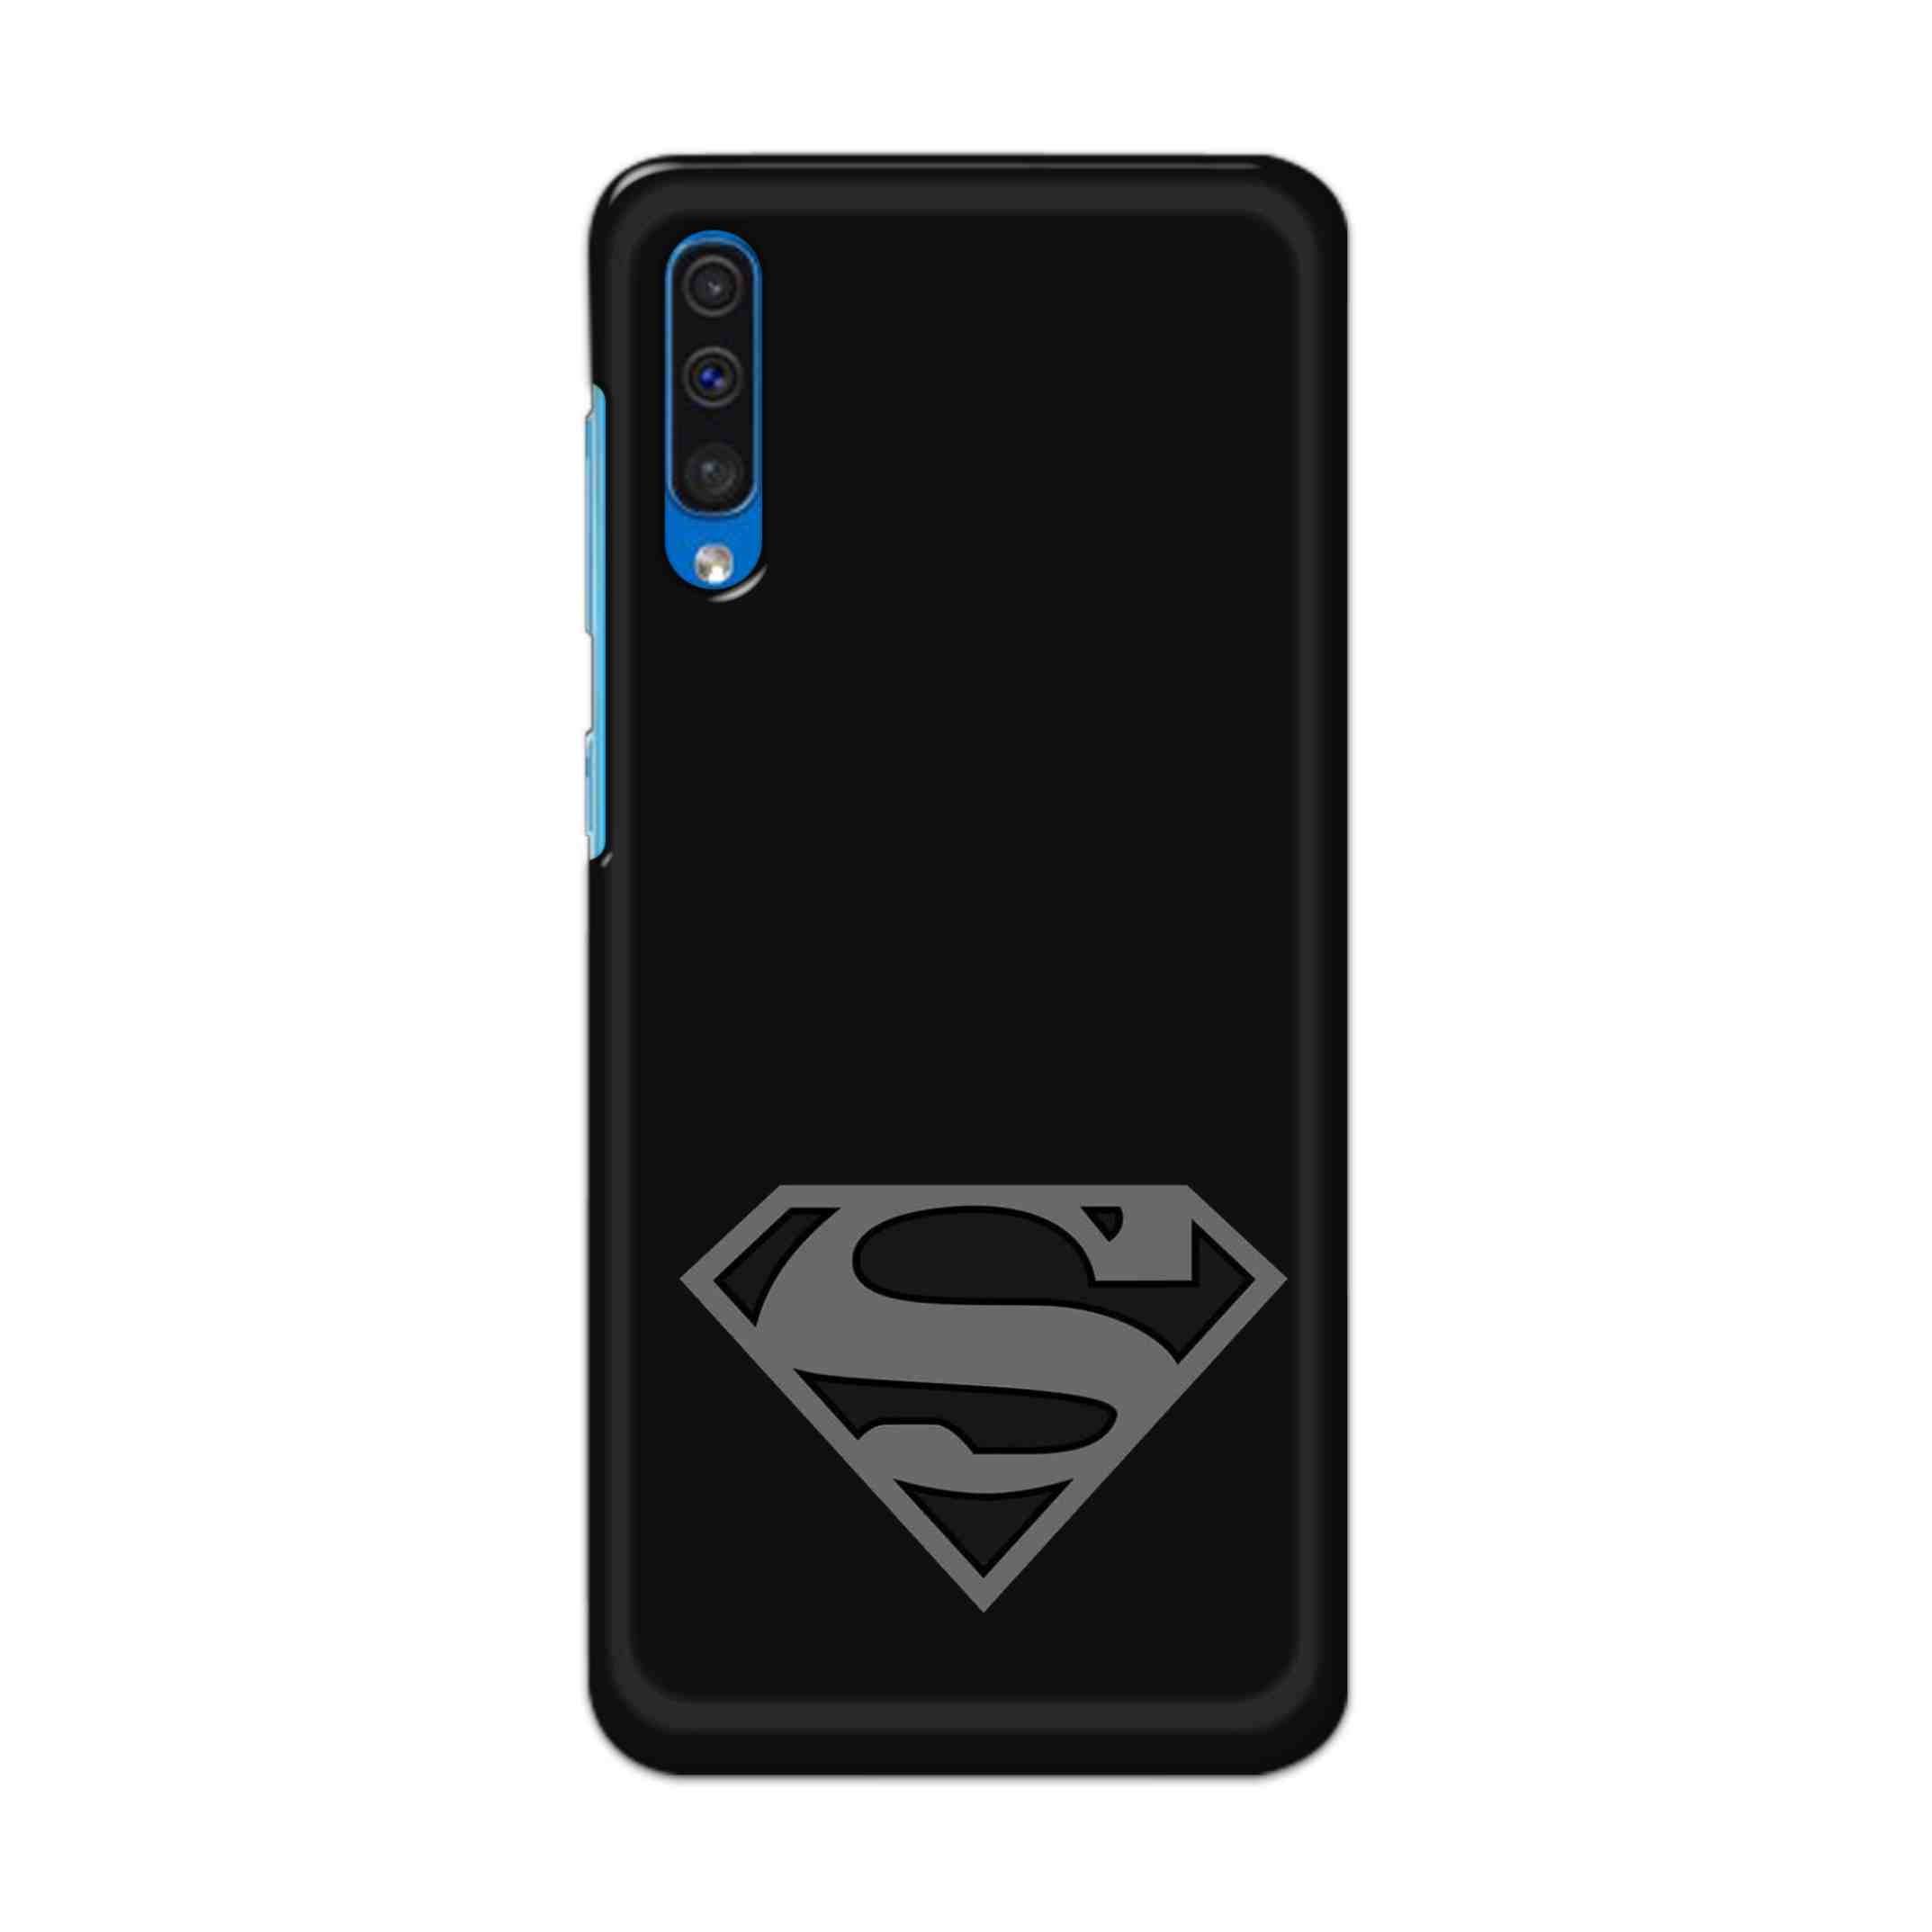 Buy Superman Logo Hard Back Mobile Phone Case Cover For Samsung Galaxy A50 / A50s / A30s Online